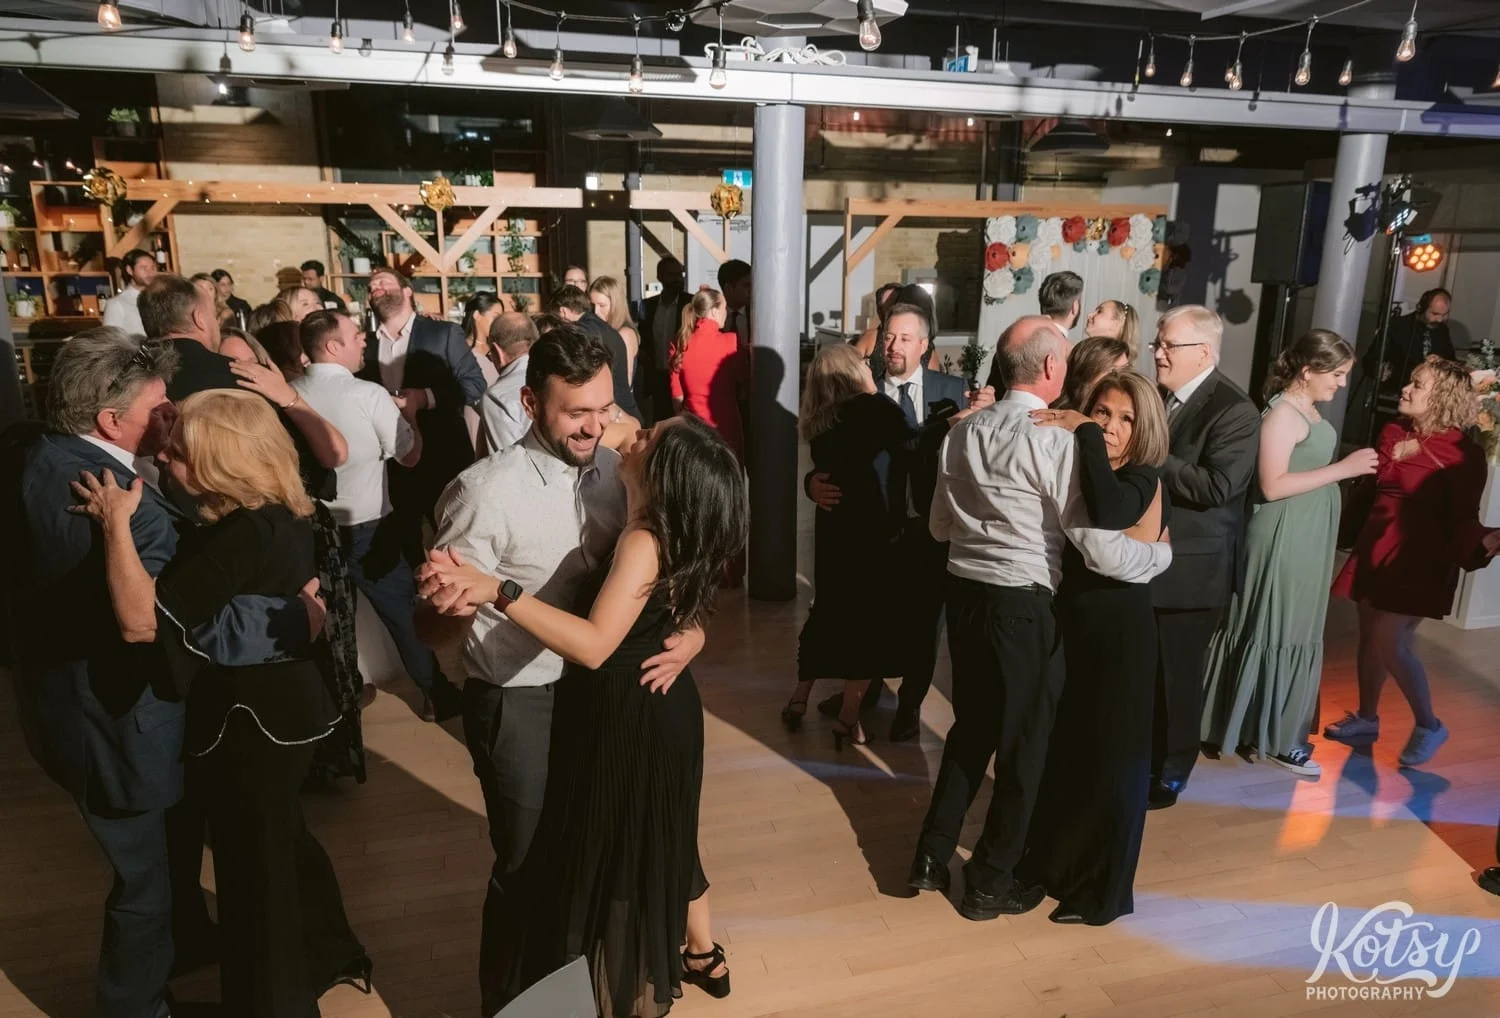 A wide shot of a group of people in formal attire dancing during a Second Floor Events wedding reception in Toronto, Canada.